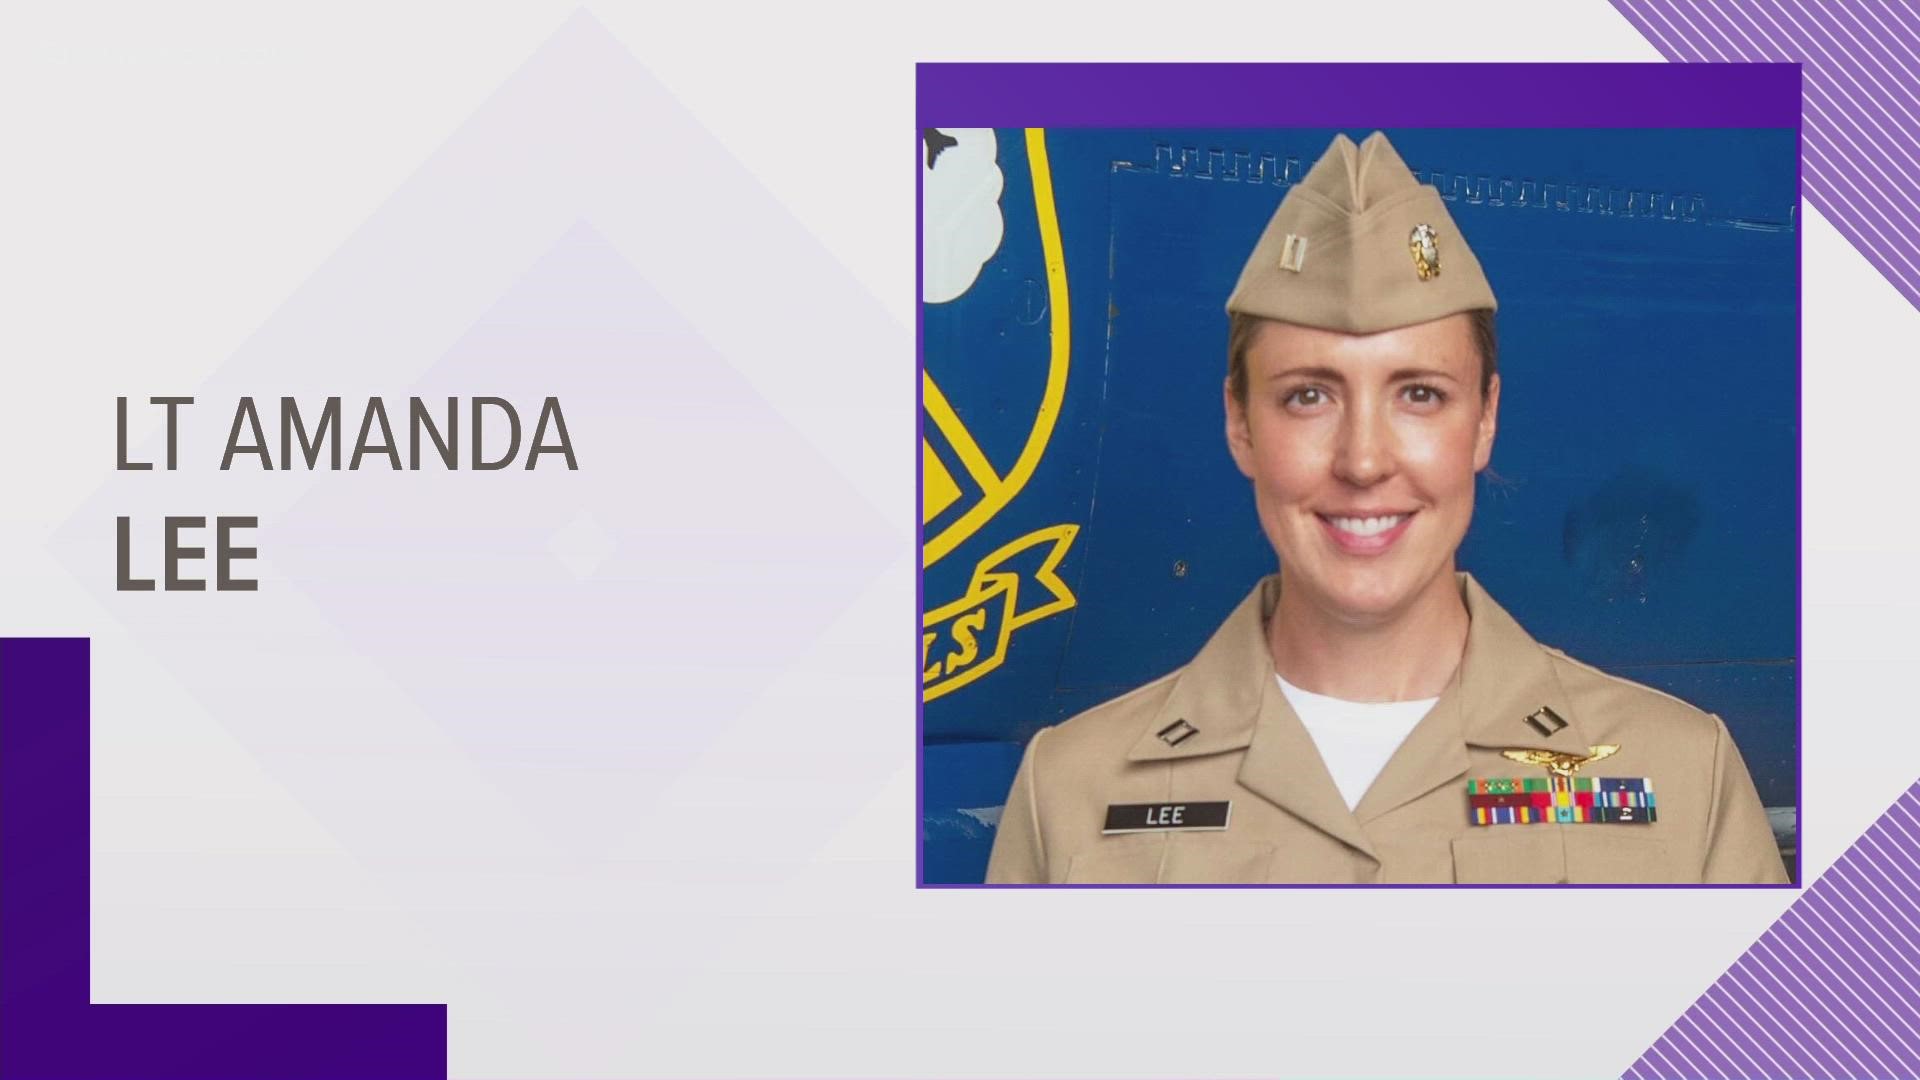 Lt. Amanda Lee, an ODU grad, will be the first female F/A-18E/F demonstration pilot for the Blue Angels.